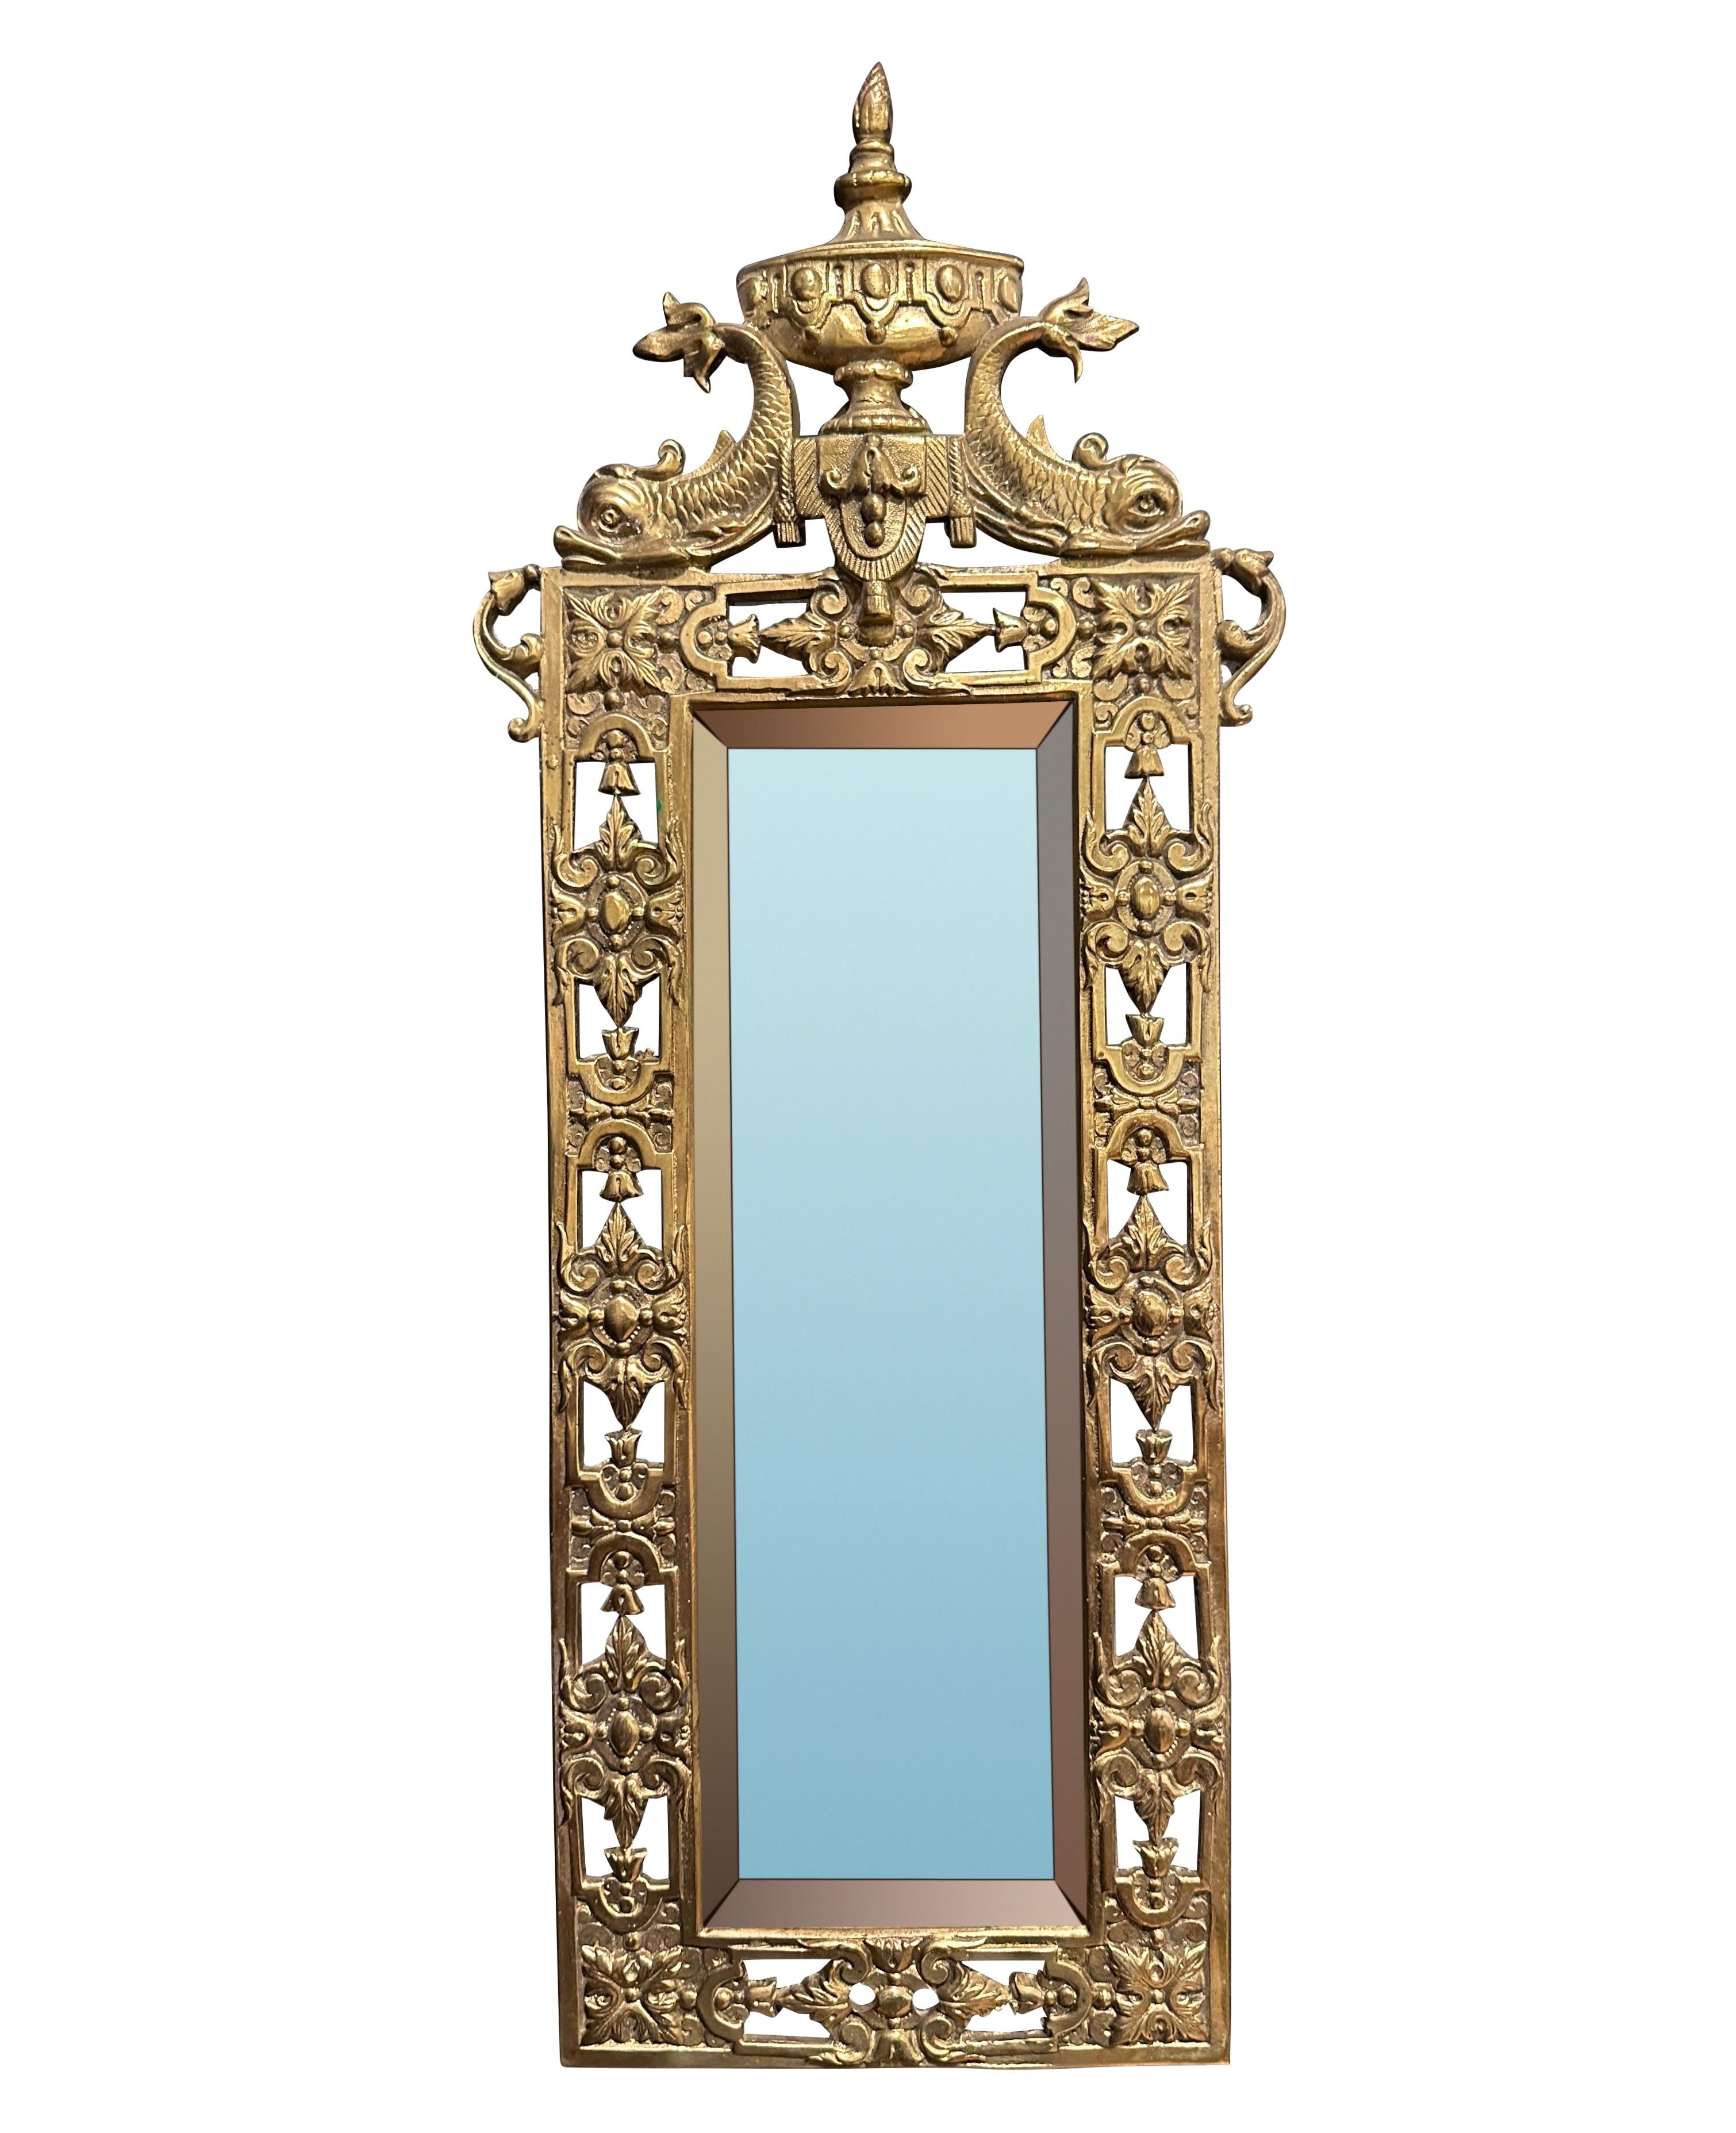 Pair of 19th century petite gilt bronze mirrors. In the Louis XVI style with dolphin fish supporting central urn with flame. Adorned with a border of square rosettes, egg and dart decorations. Original beveled mirrors.